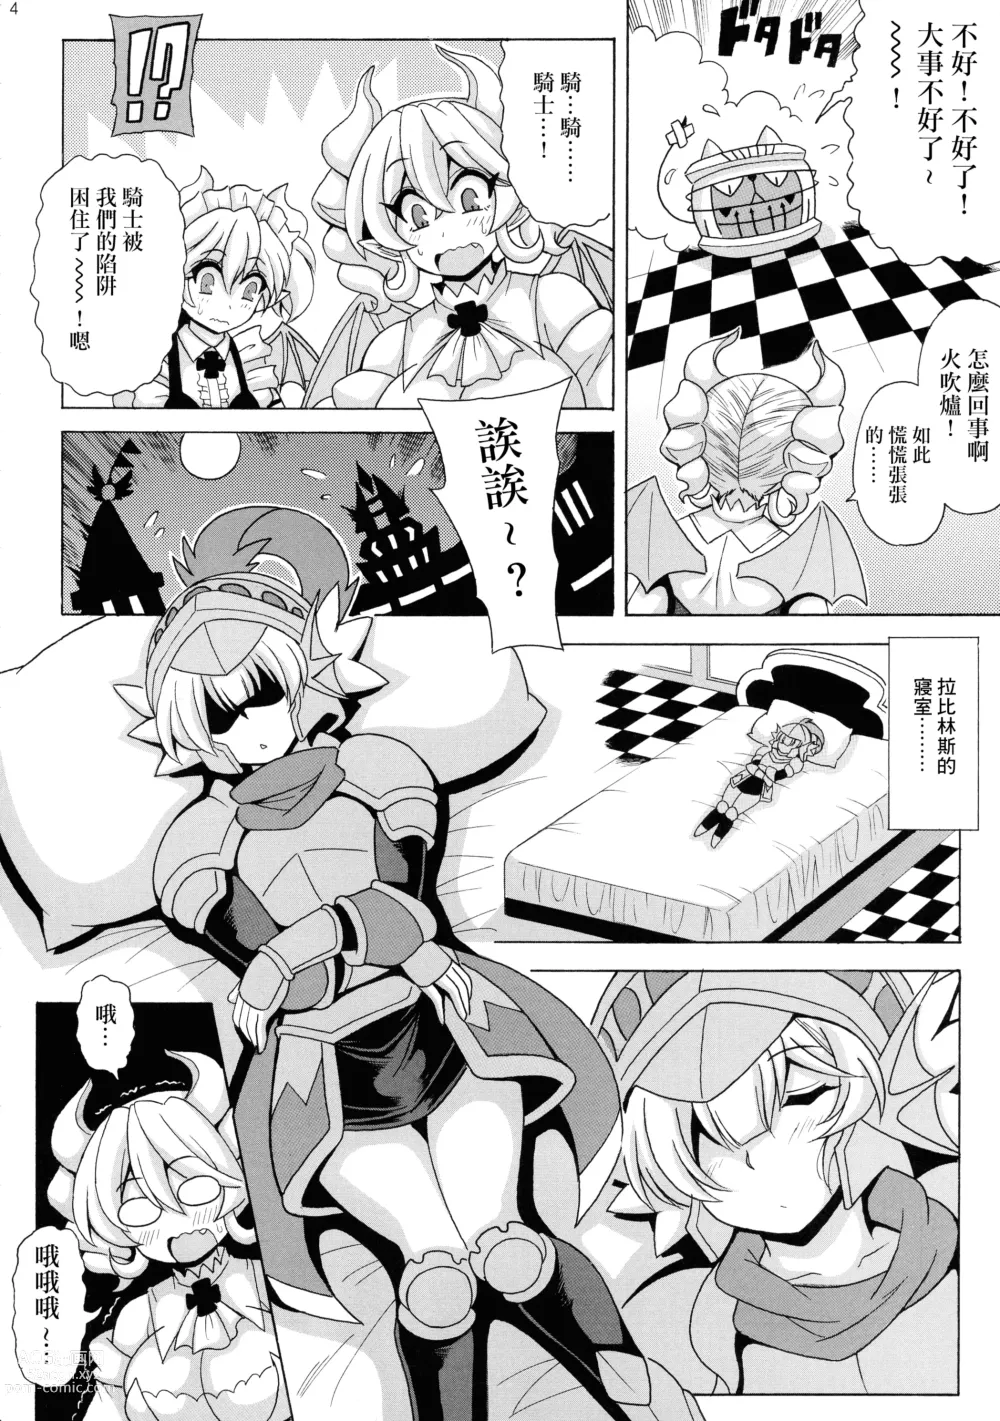 Page 6 of doujinshi LABRYNTH MILK